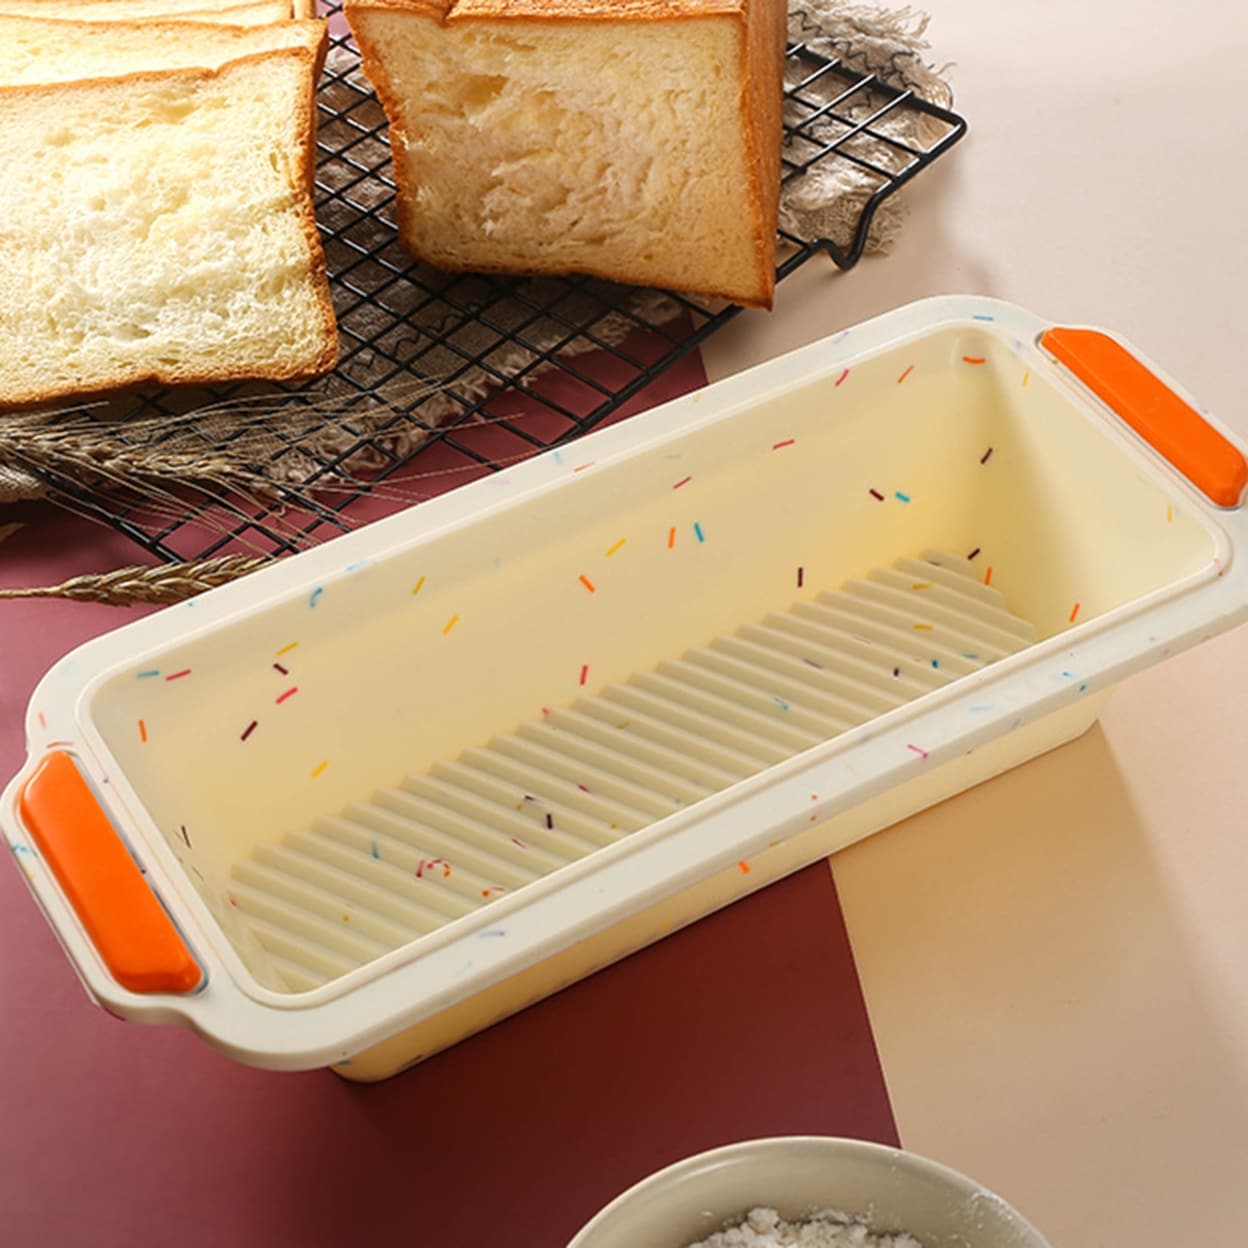 https://ak1.ostkcdn.com/images/products/is/images/direct/4a9e8057903c4cd981b51d6372be7212108bc4c4/Rectangle-NonStick-Bread-Loaf-Toast-Silicone-Baking-Pan-Tray-Mold-Diy-Bakeware.jpg